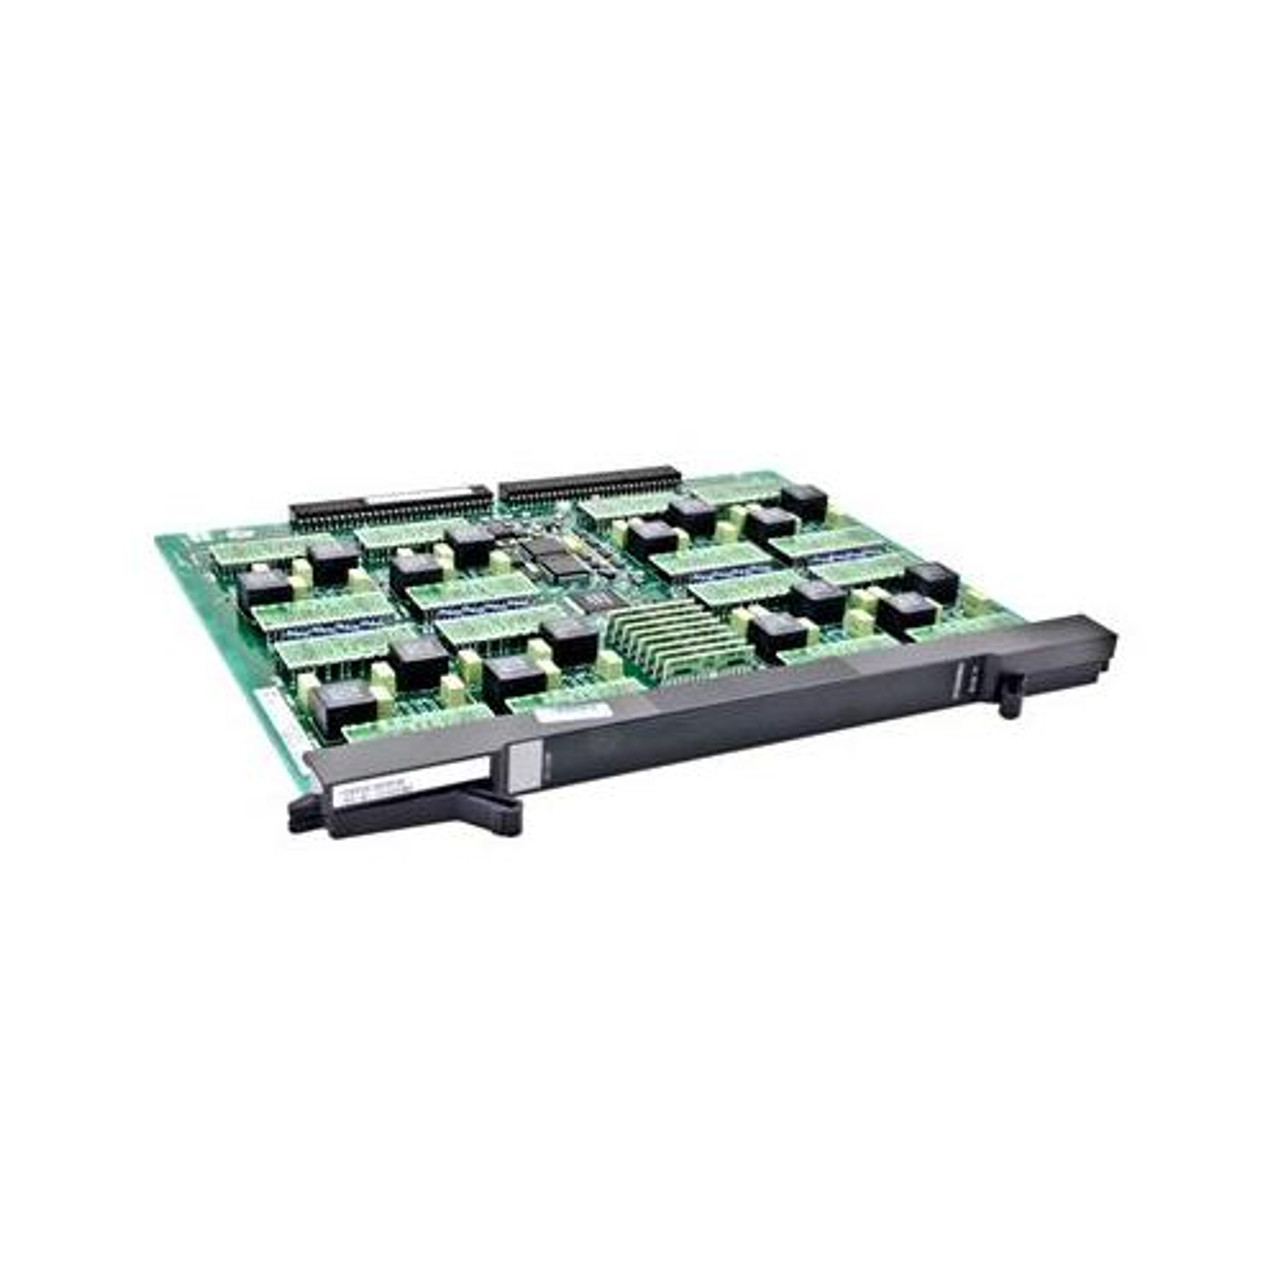 126404-001 Compaq Twisted Pair UPT / AUI Ethernet Board for PageMarq 15 PageMarq 20